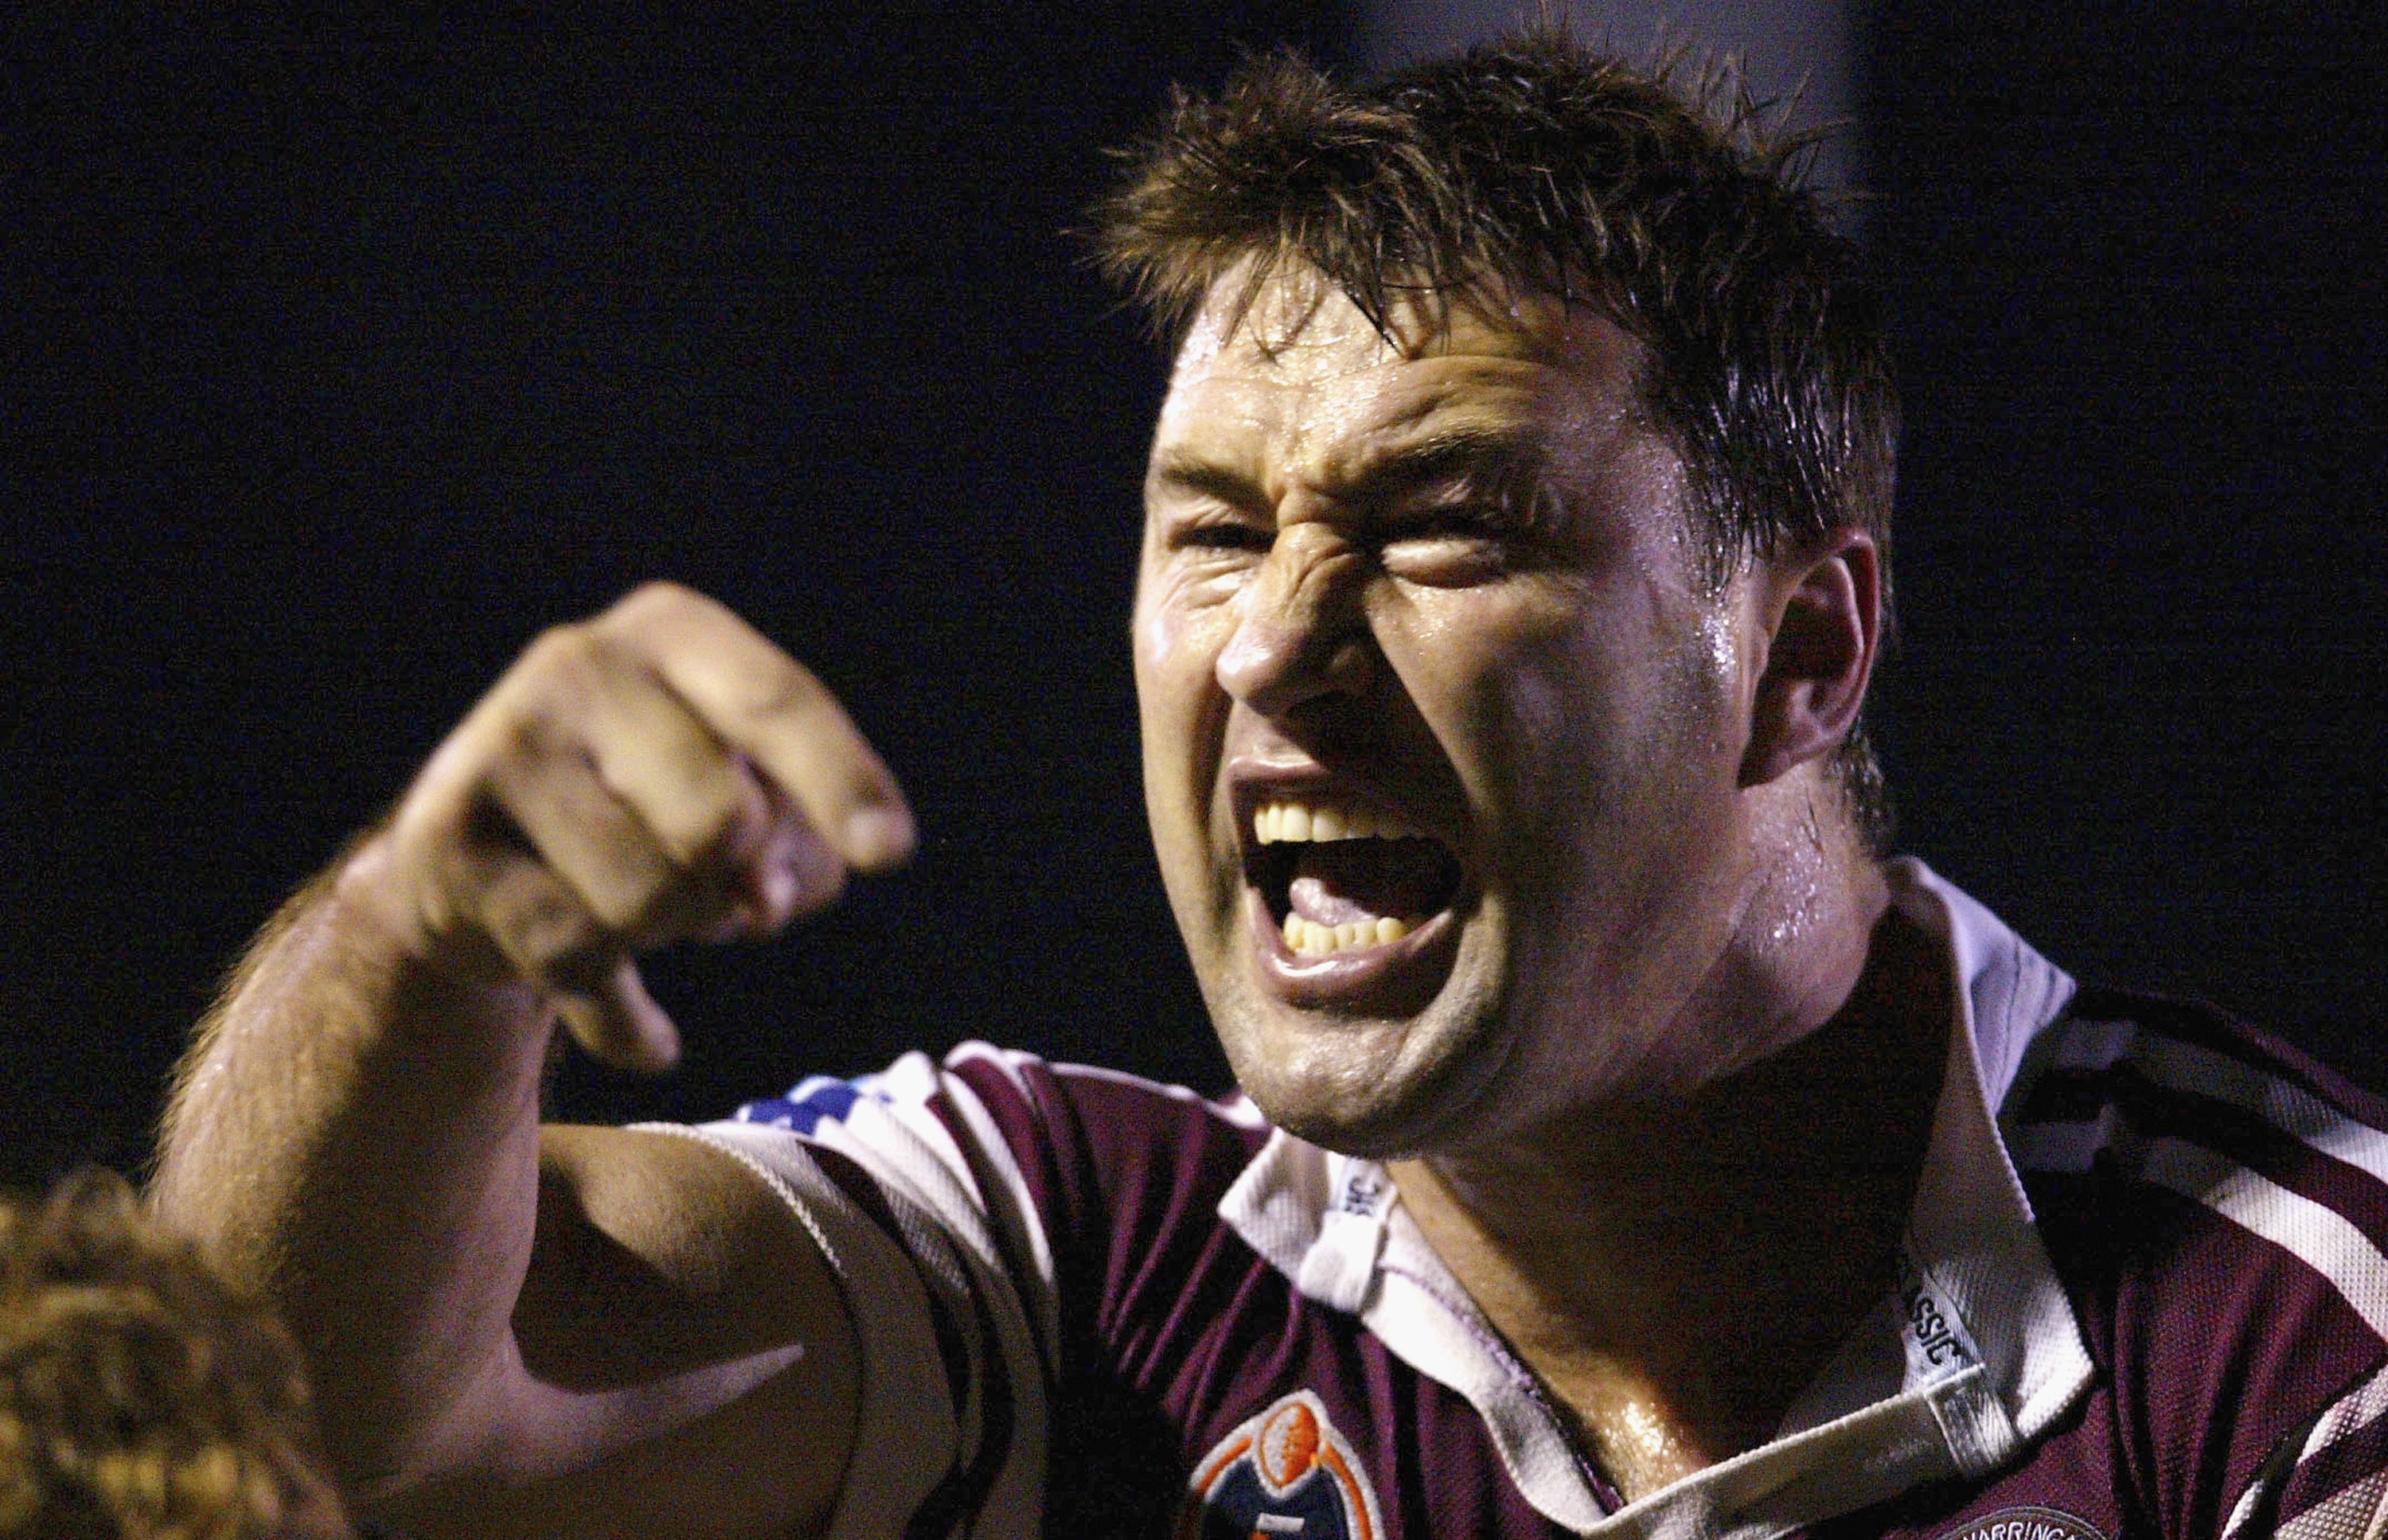 Terry Hill of the Eagles screams at the touch judge after a try during the round 25 NRL match between the Manly Sea Eagles and the Warriors at Brookvale Oval on August 27, 2005 in Sydney, Australia. (Photo by Mark Nolan/Getty Images) *** Local Caption *** Terry Hill